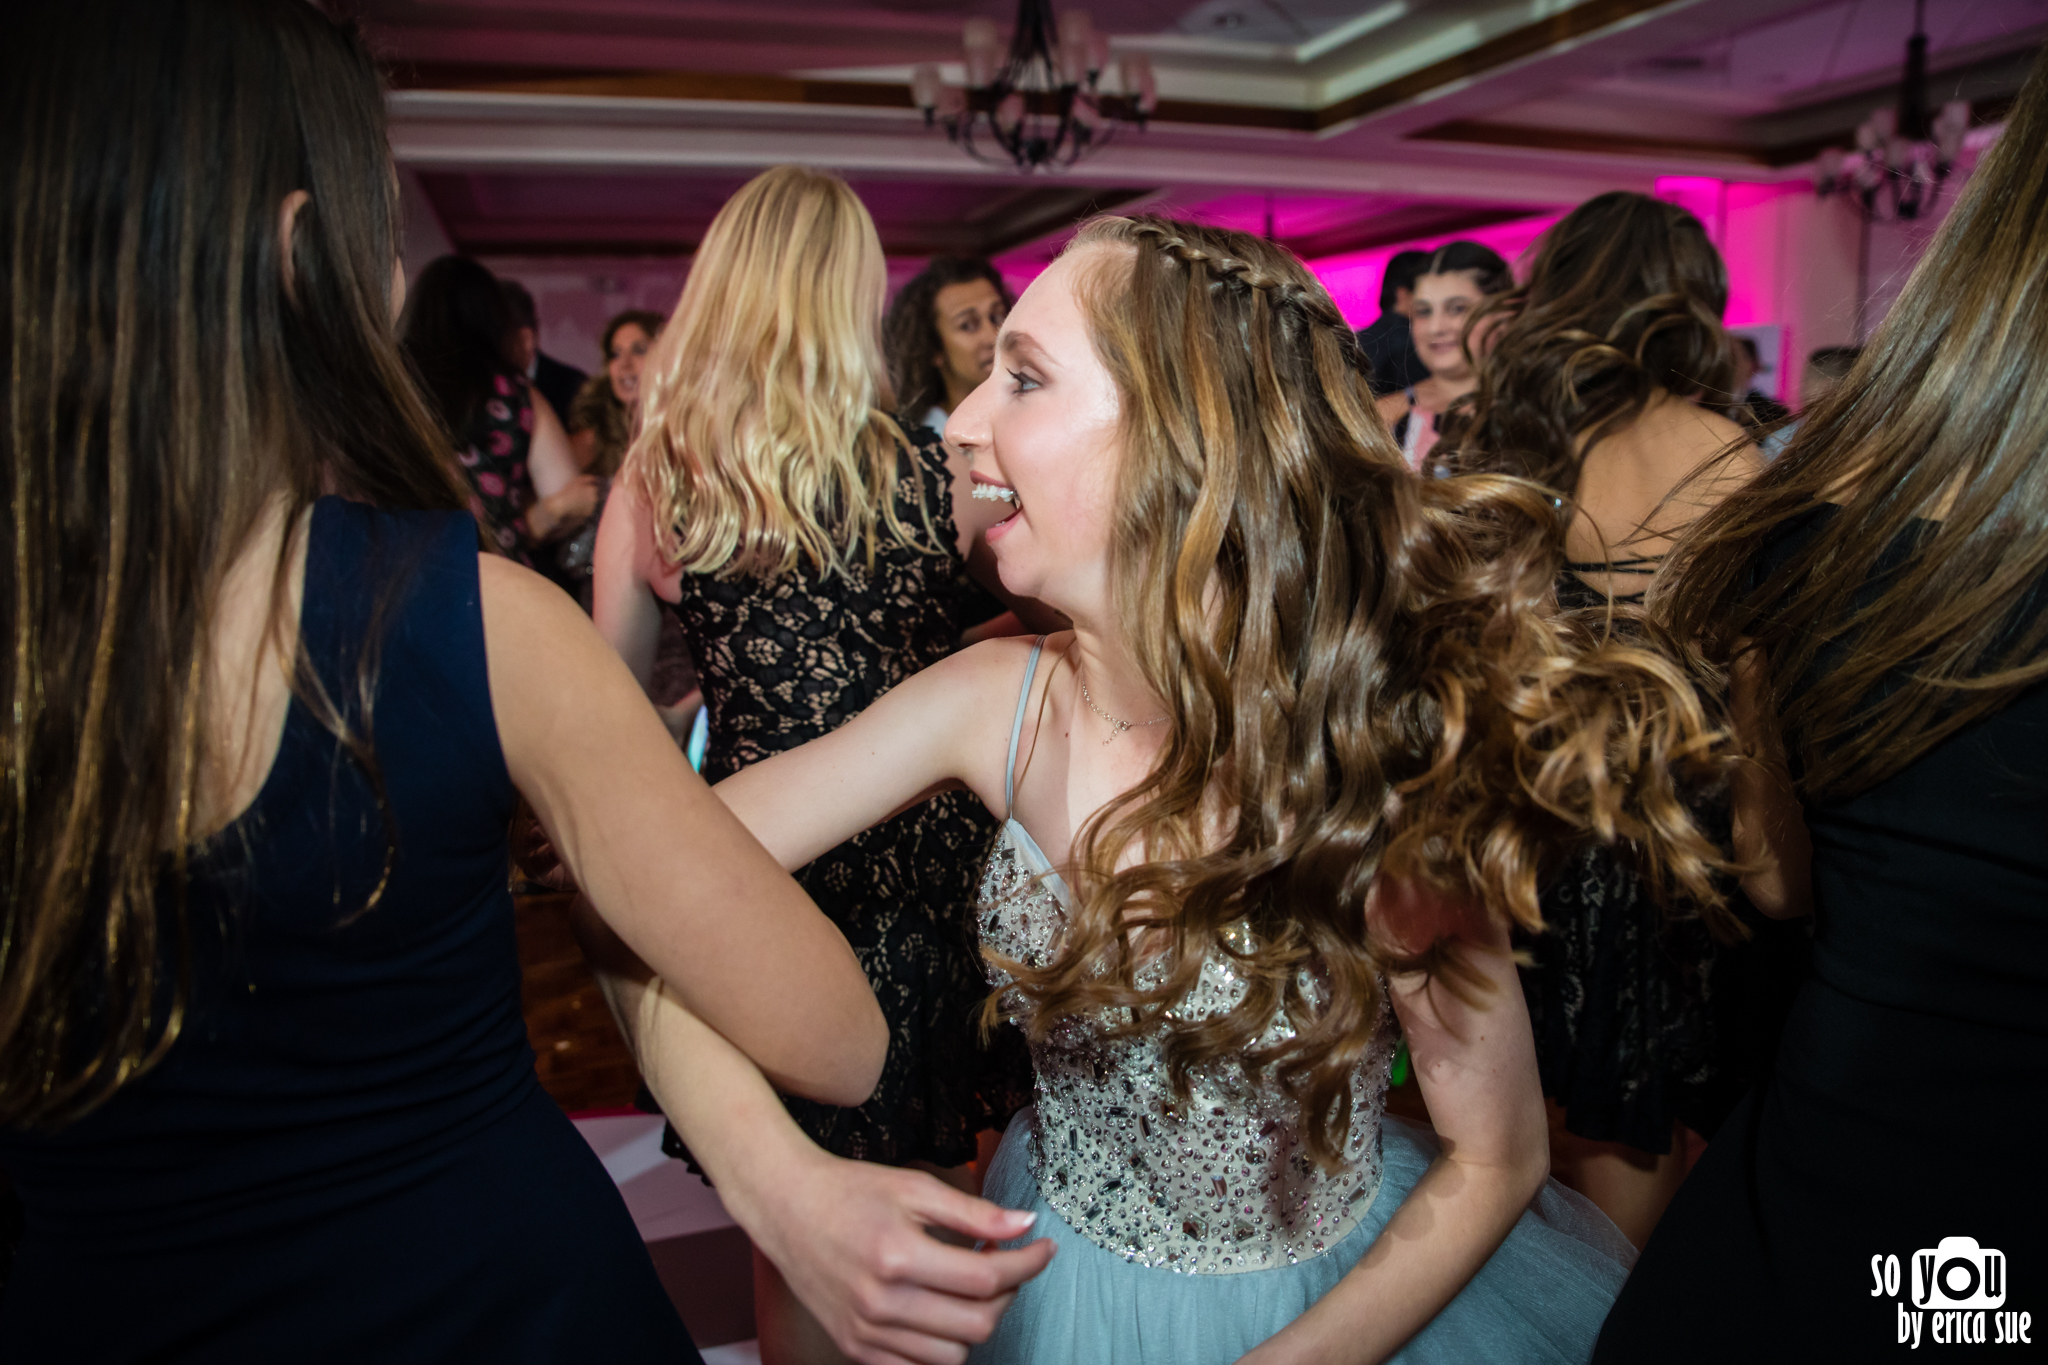 parkland-fl-mitzvah-photography-so-you-by-erica-sue-1261.jpg